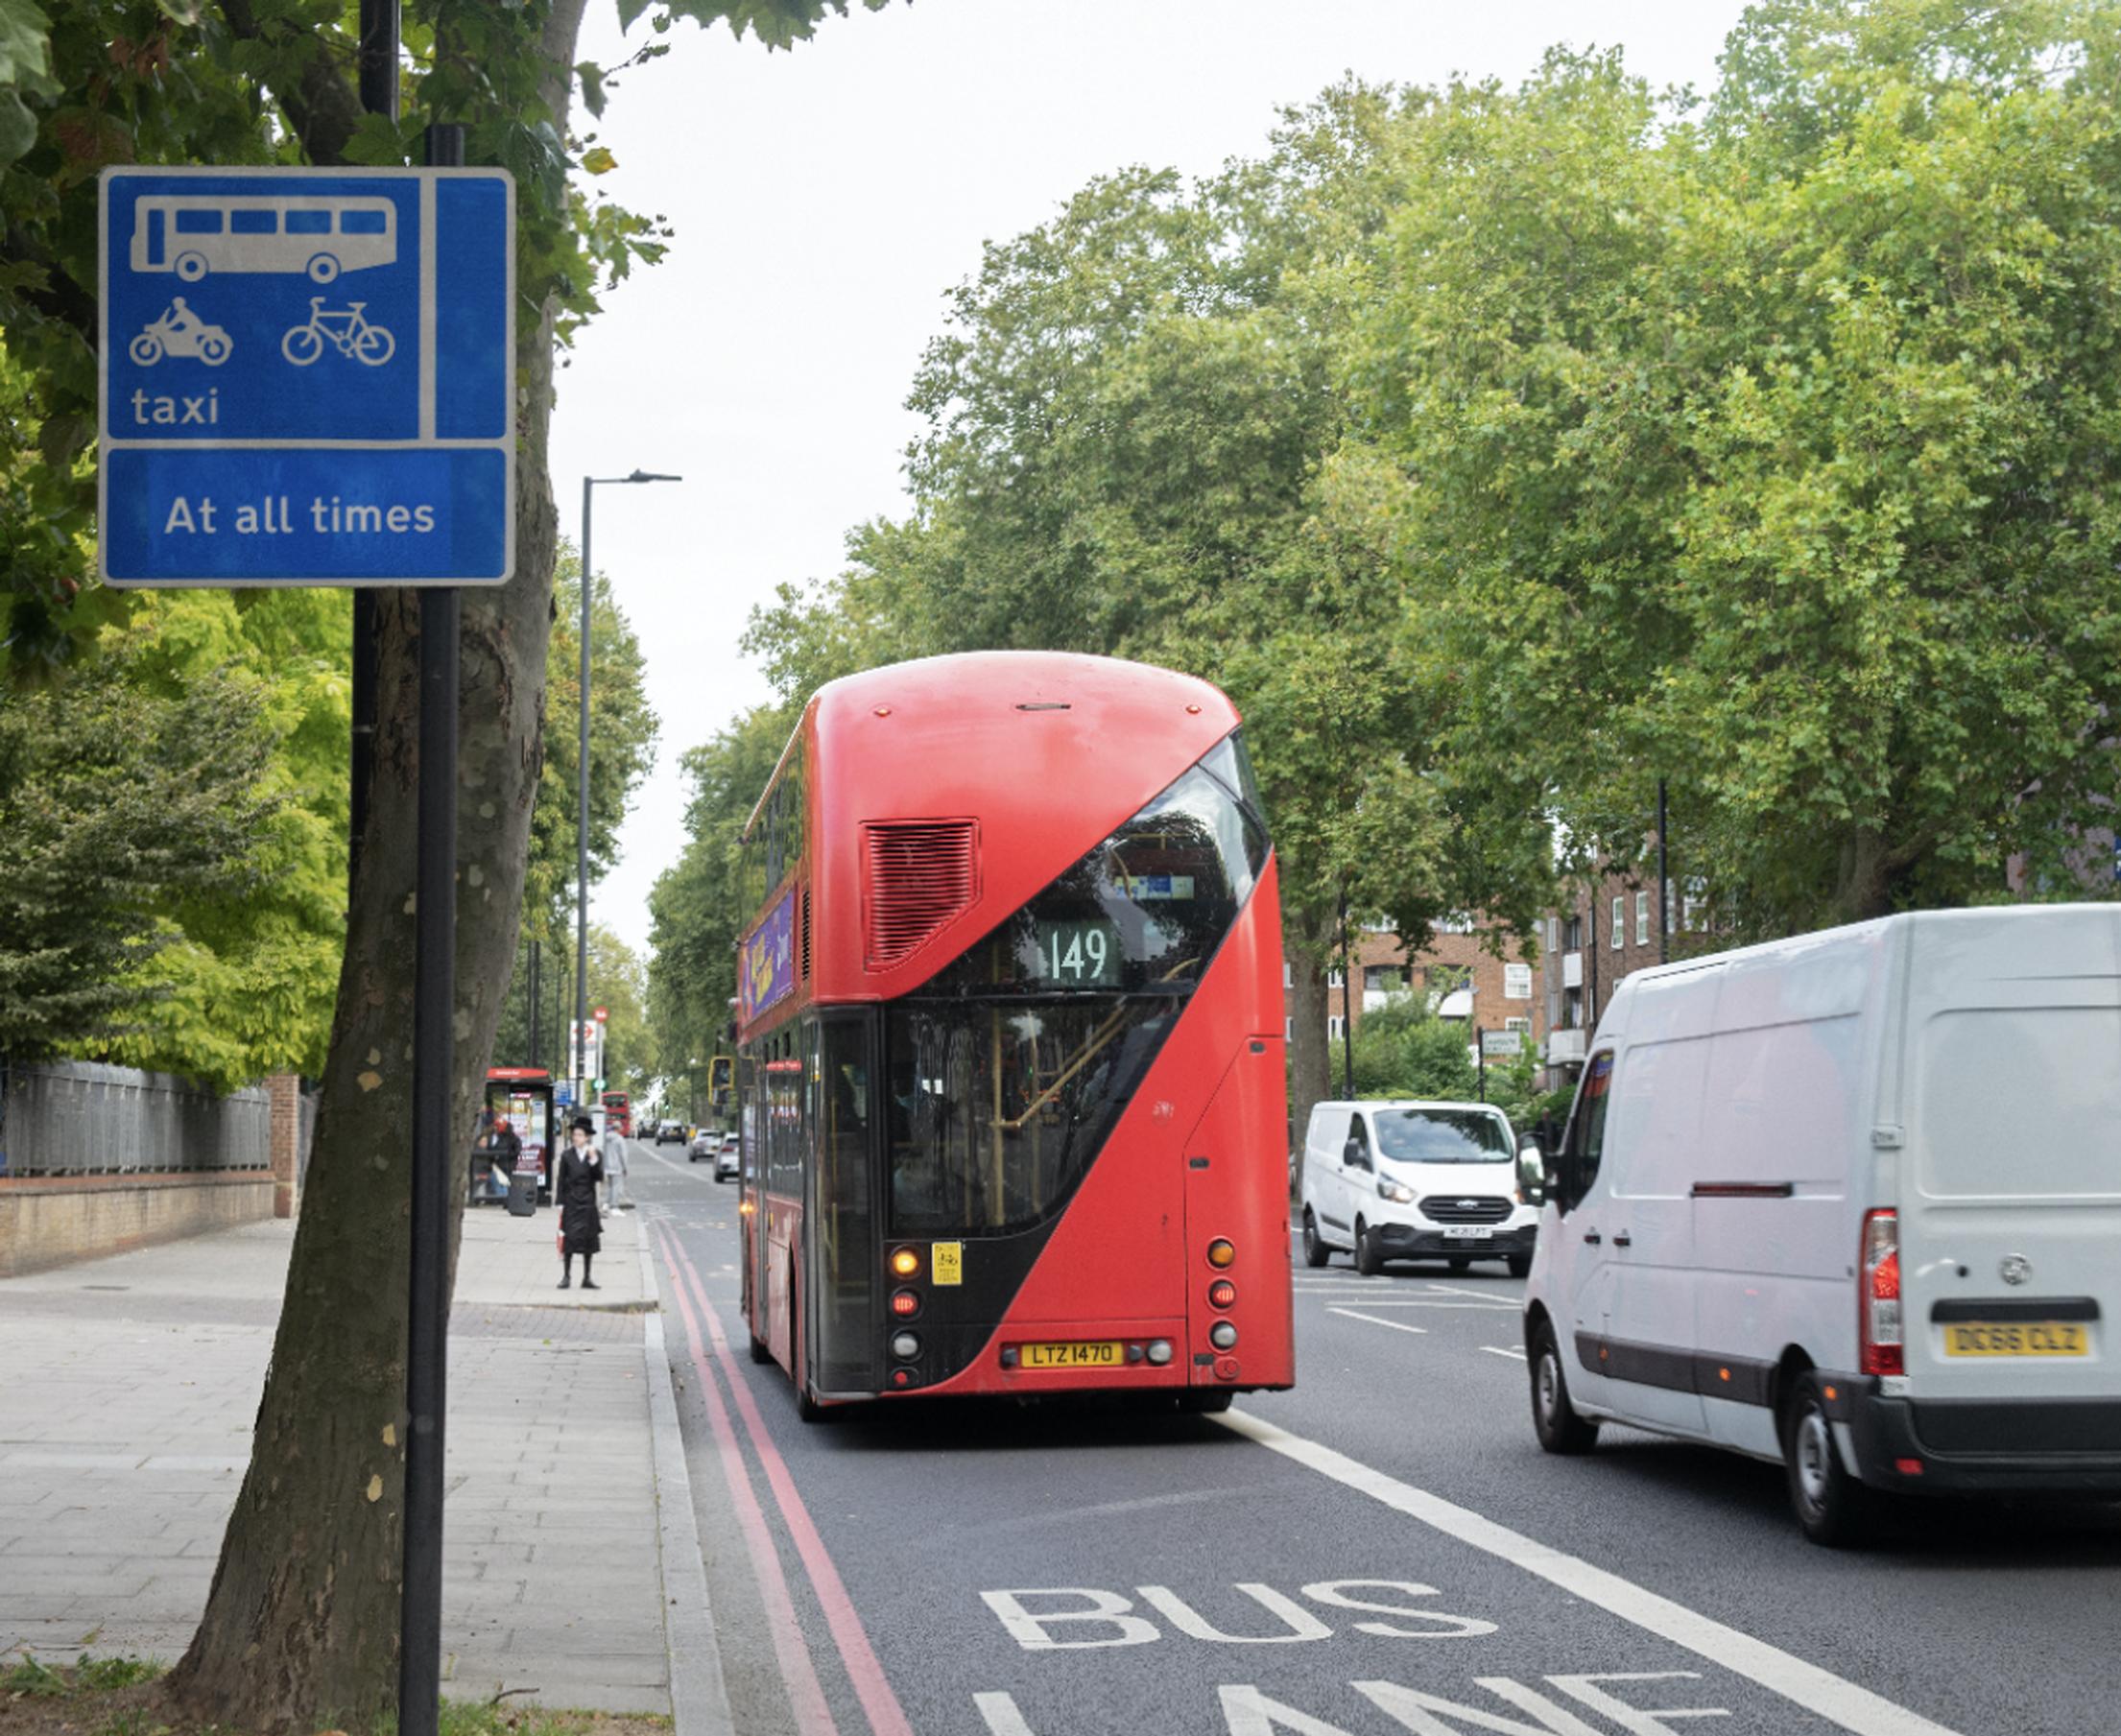 Motorists who park or travel in the affected bus lanes will be subject to enforcement via TfL’s enforcement camera network or enforcement officers